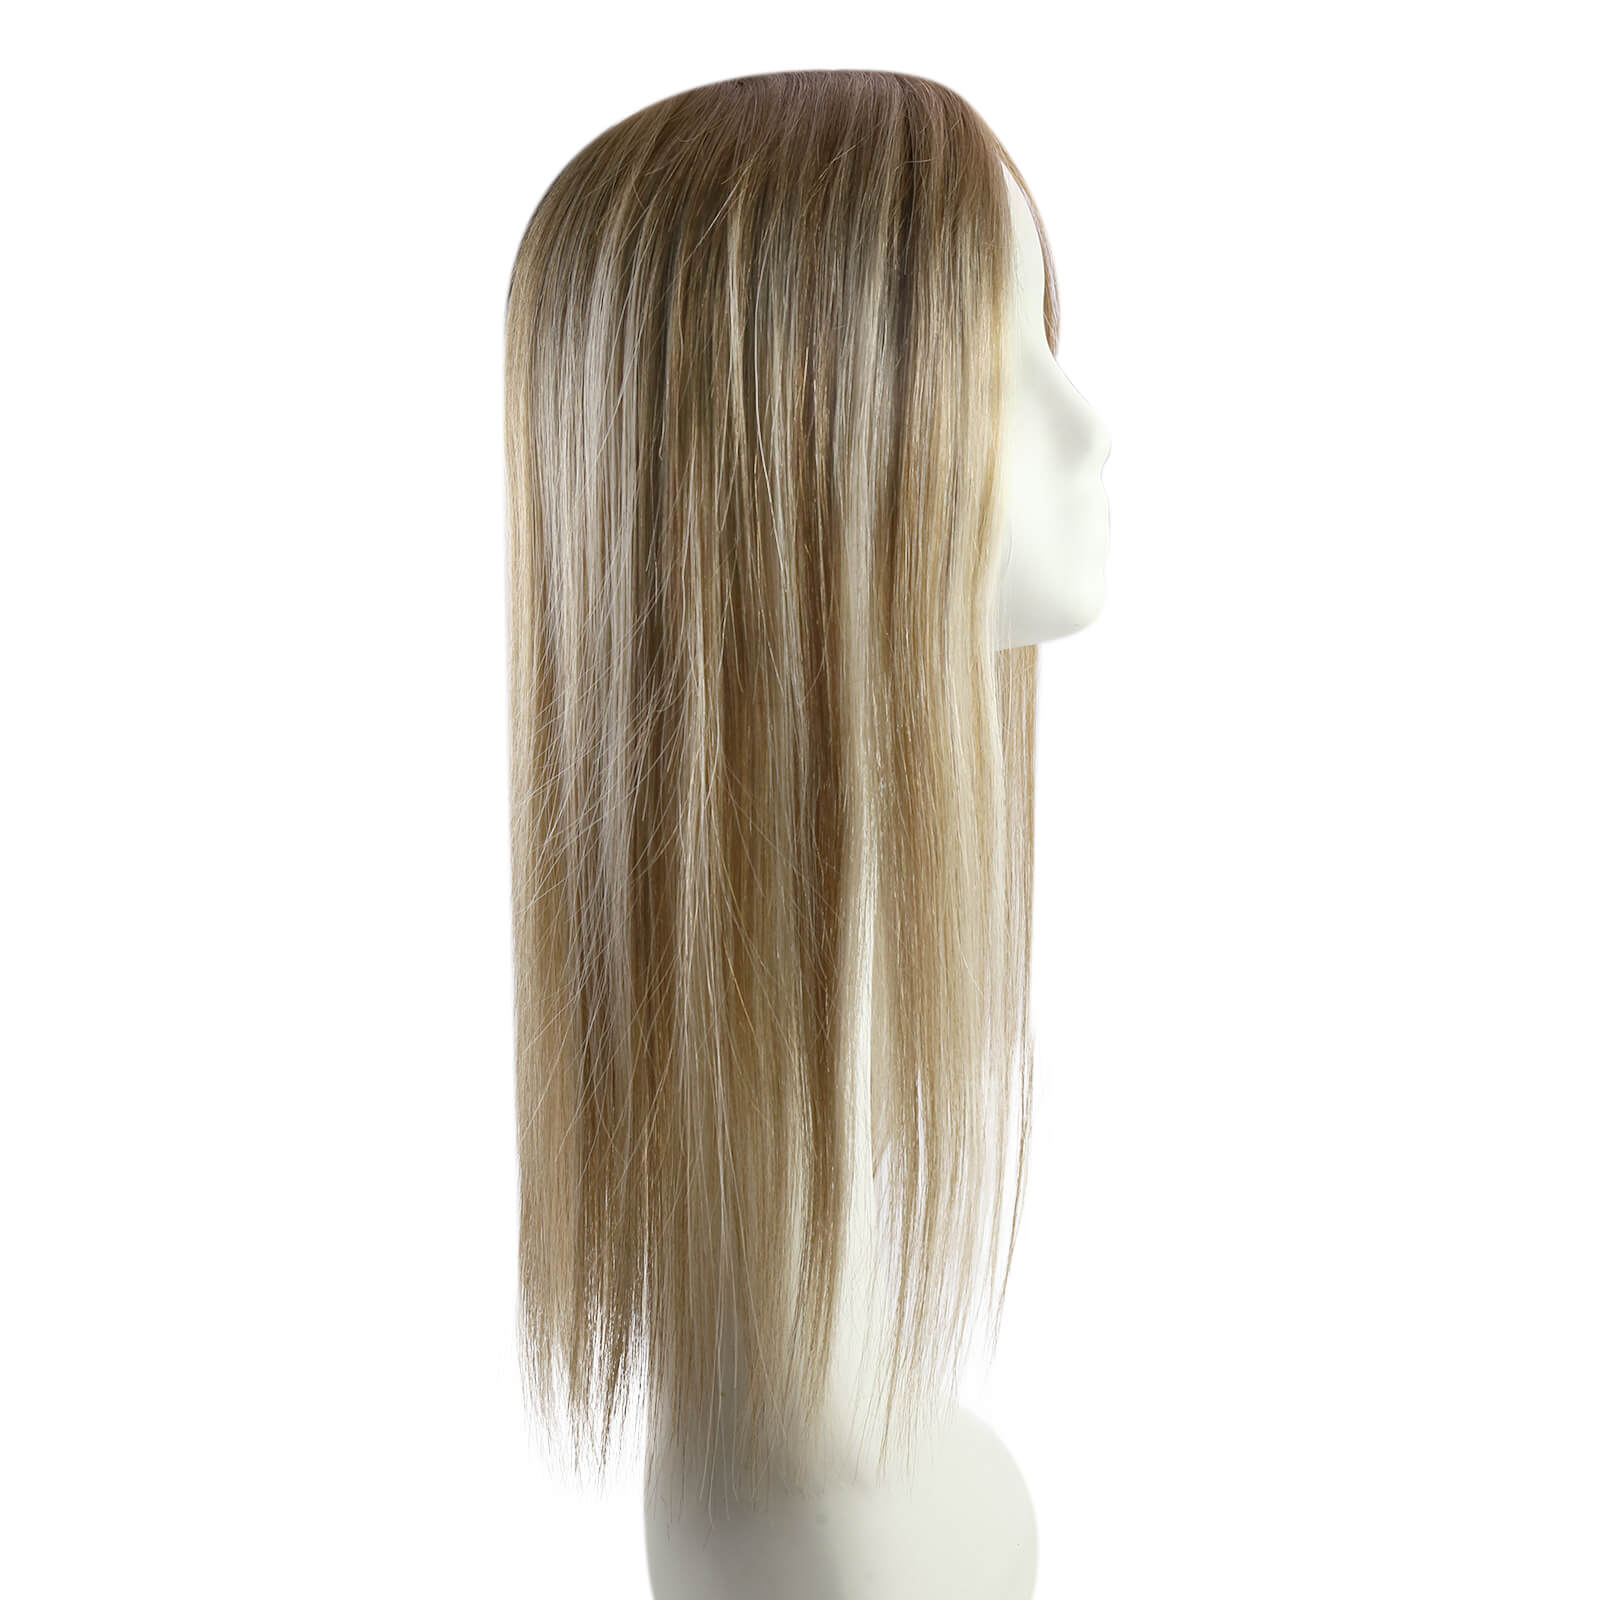 [US Only][Half Price] Virgin Hair Topper Brown To Blonde Balayage Hair Top Pieces #8C/60